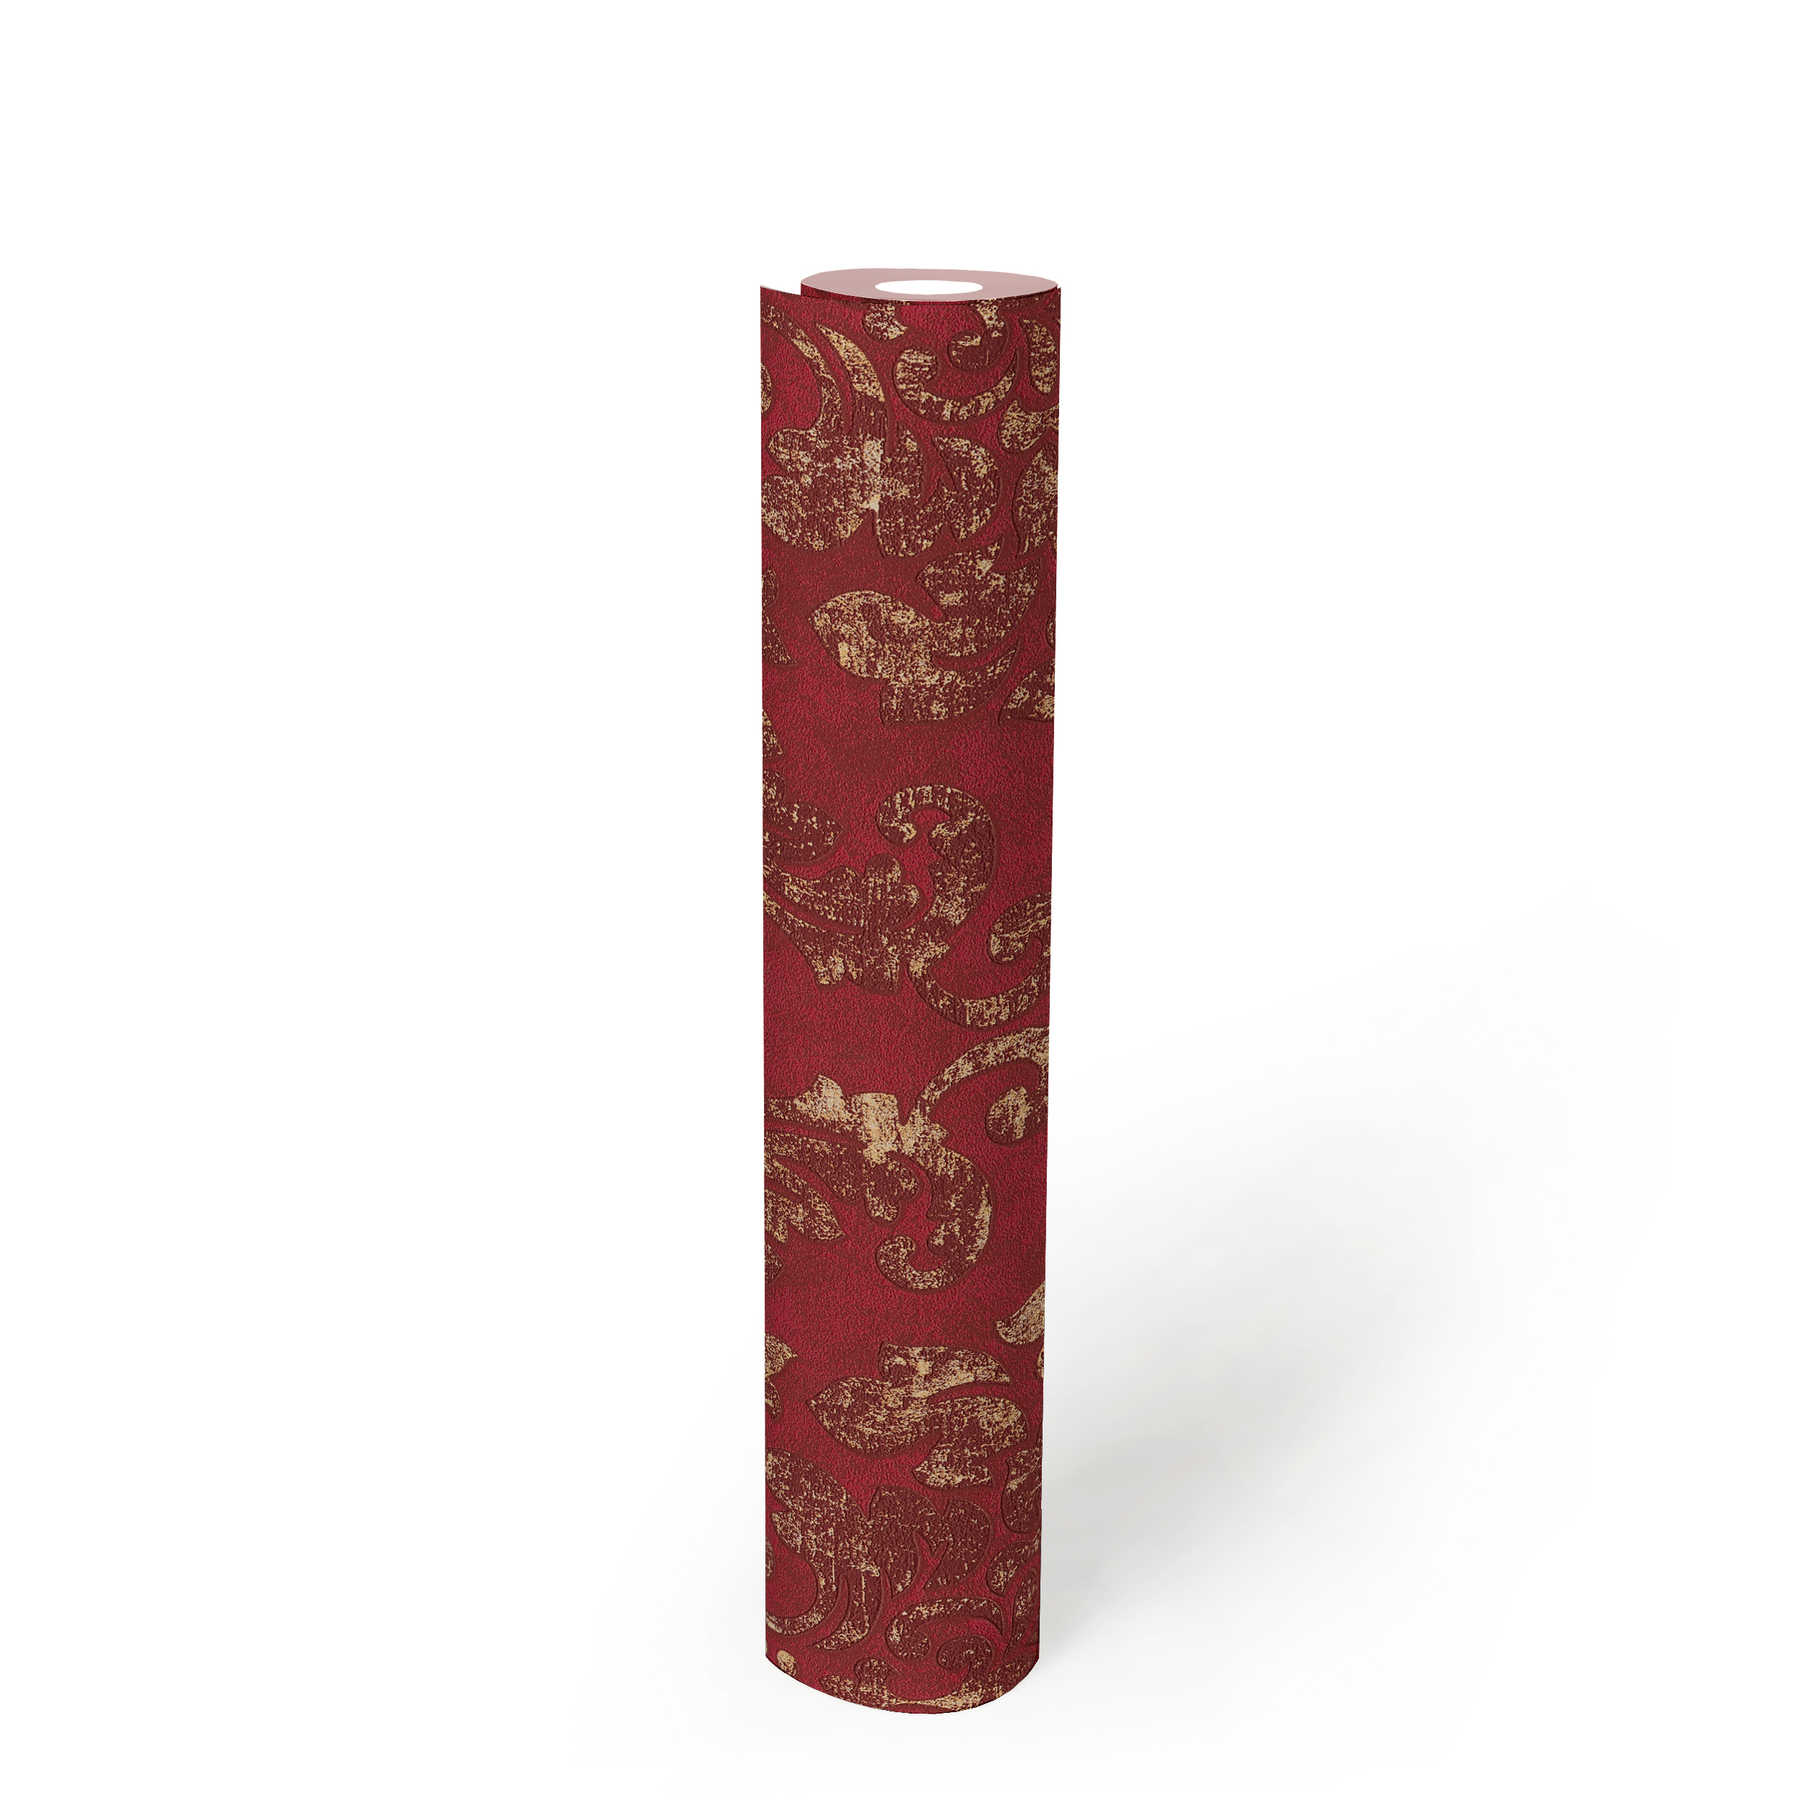             Baroque wallpaper with ornaments in used look - red, gold
        